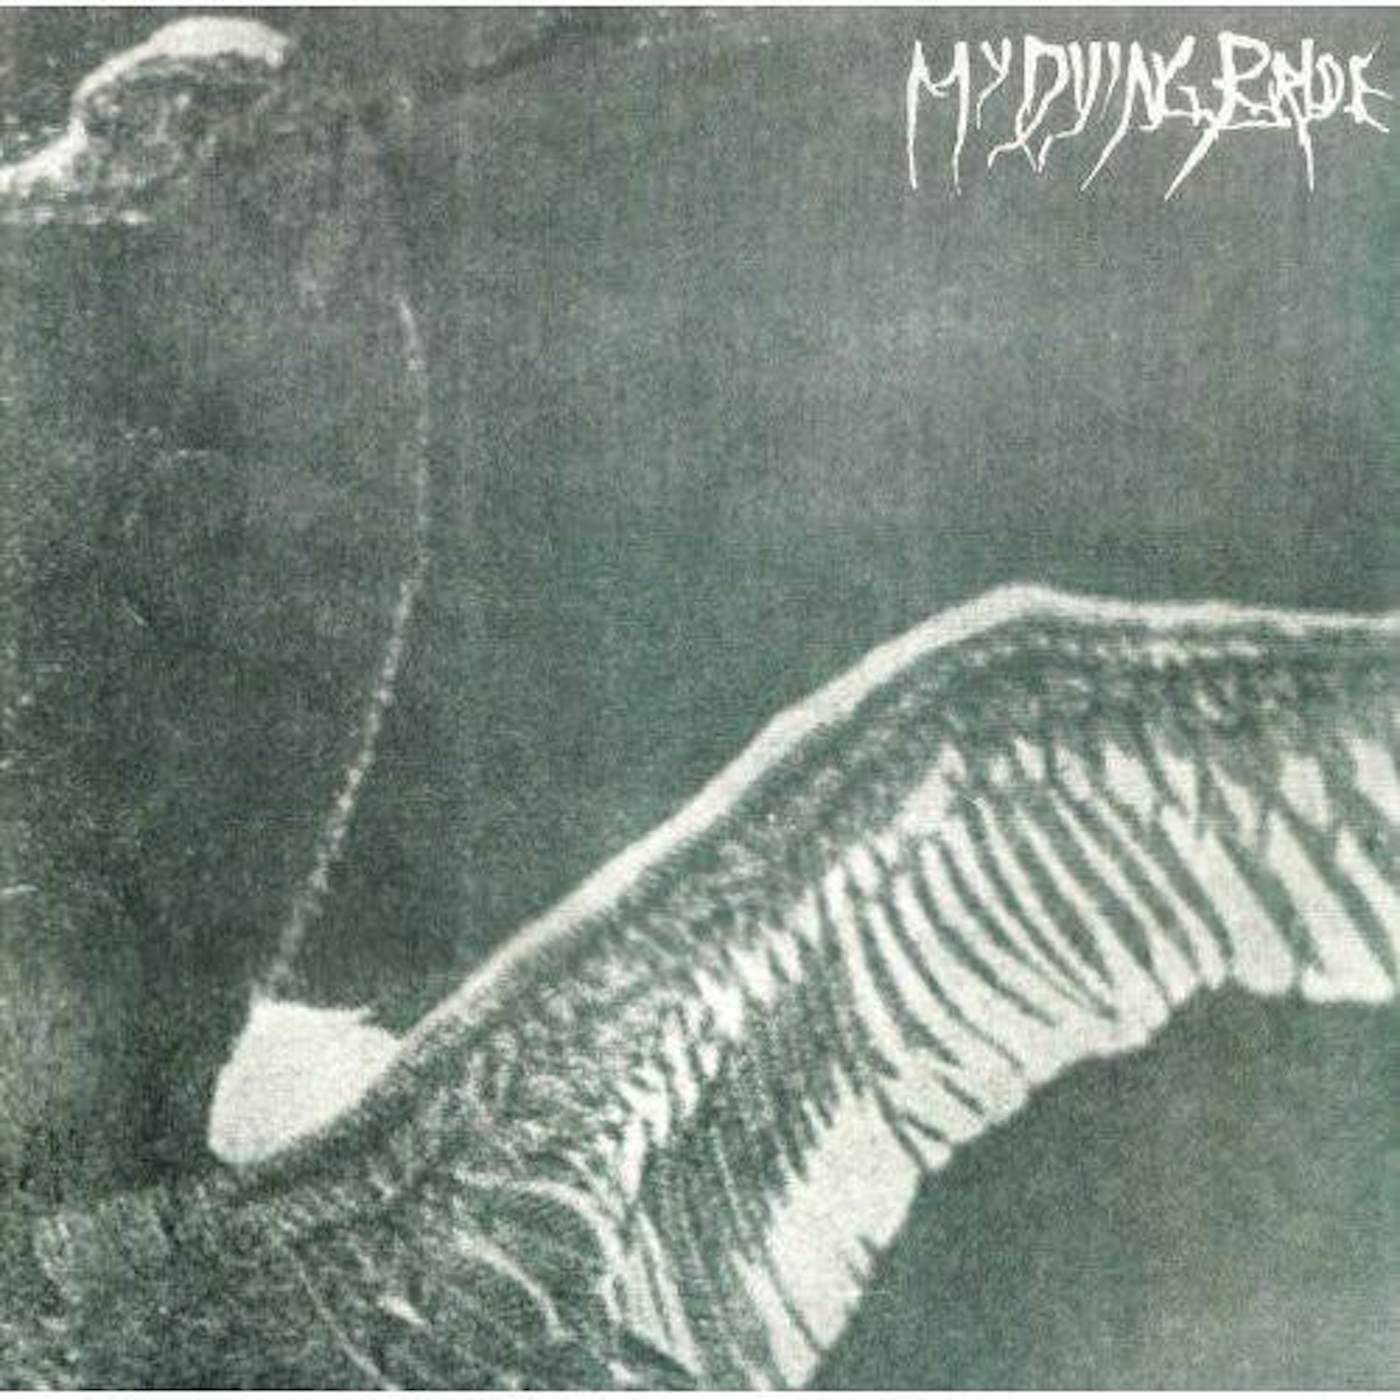 My Dying Bride Turn Loose the Swans Vinyl Record